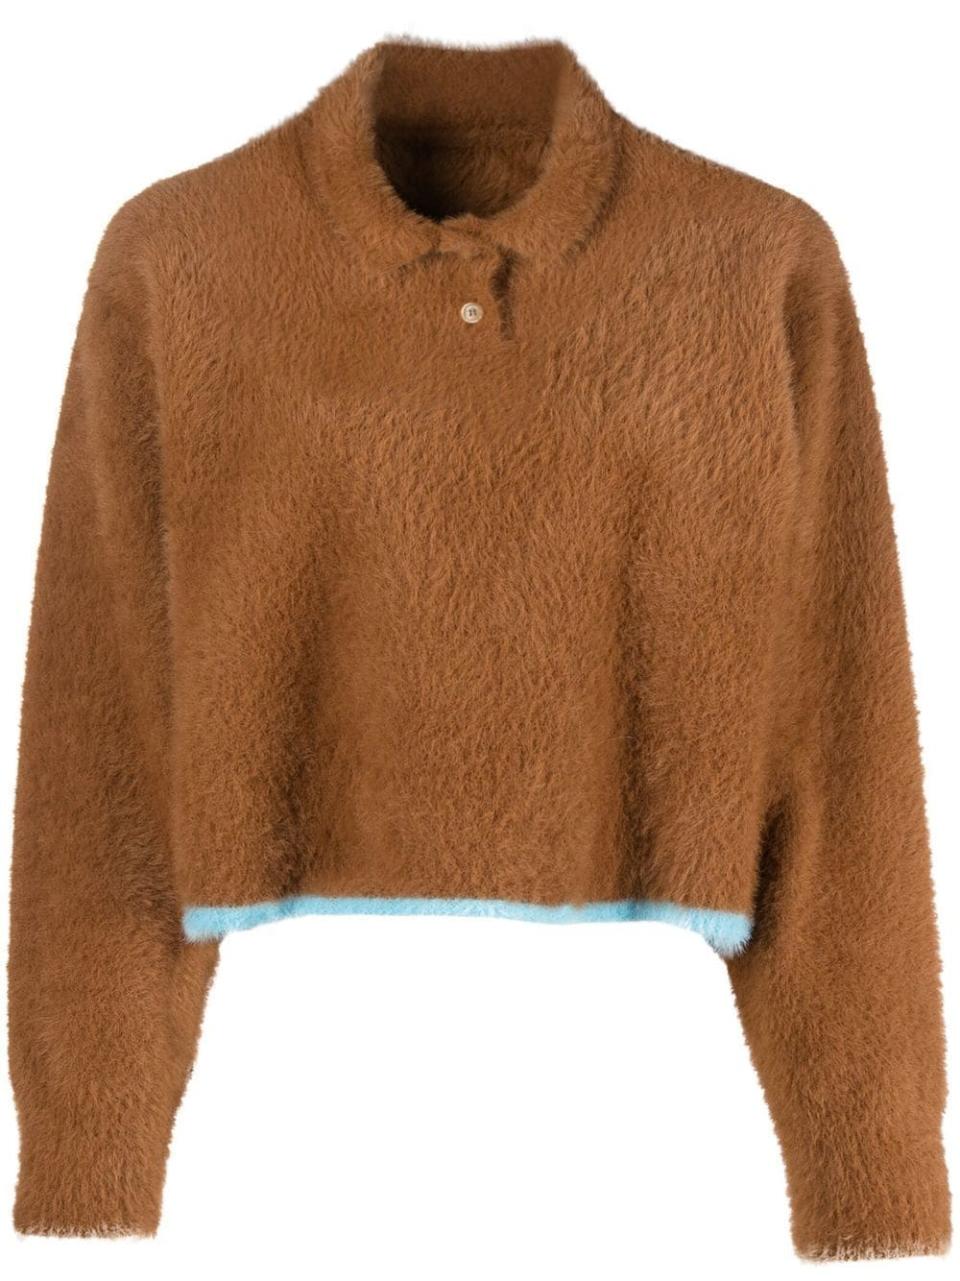 brown fuzzy cropped polo with blue hem